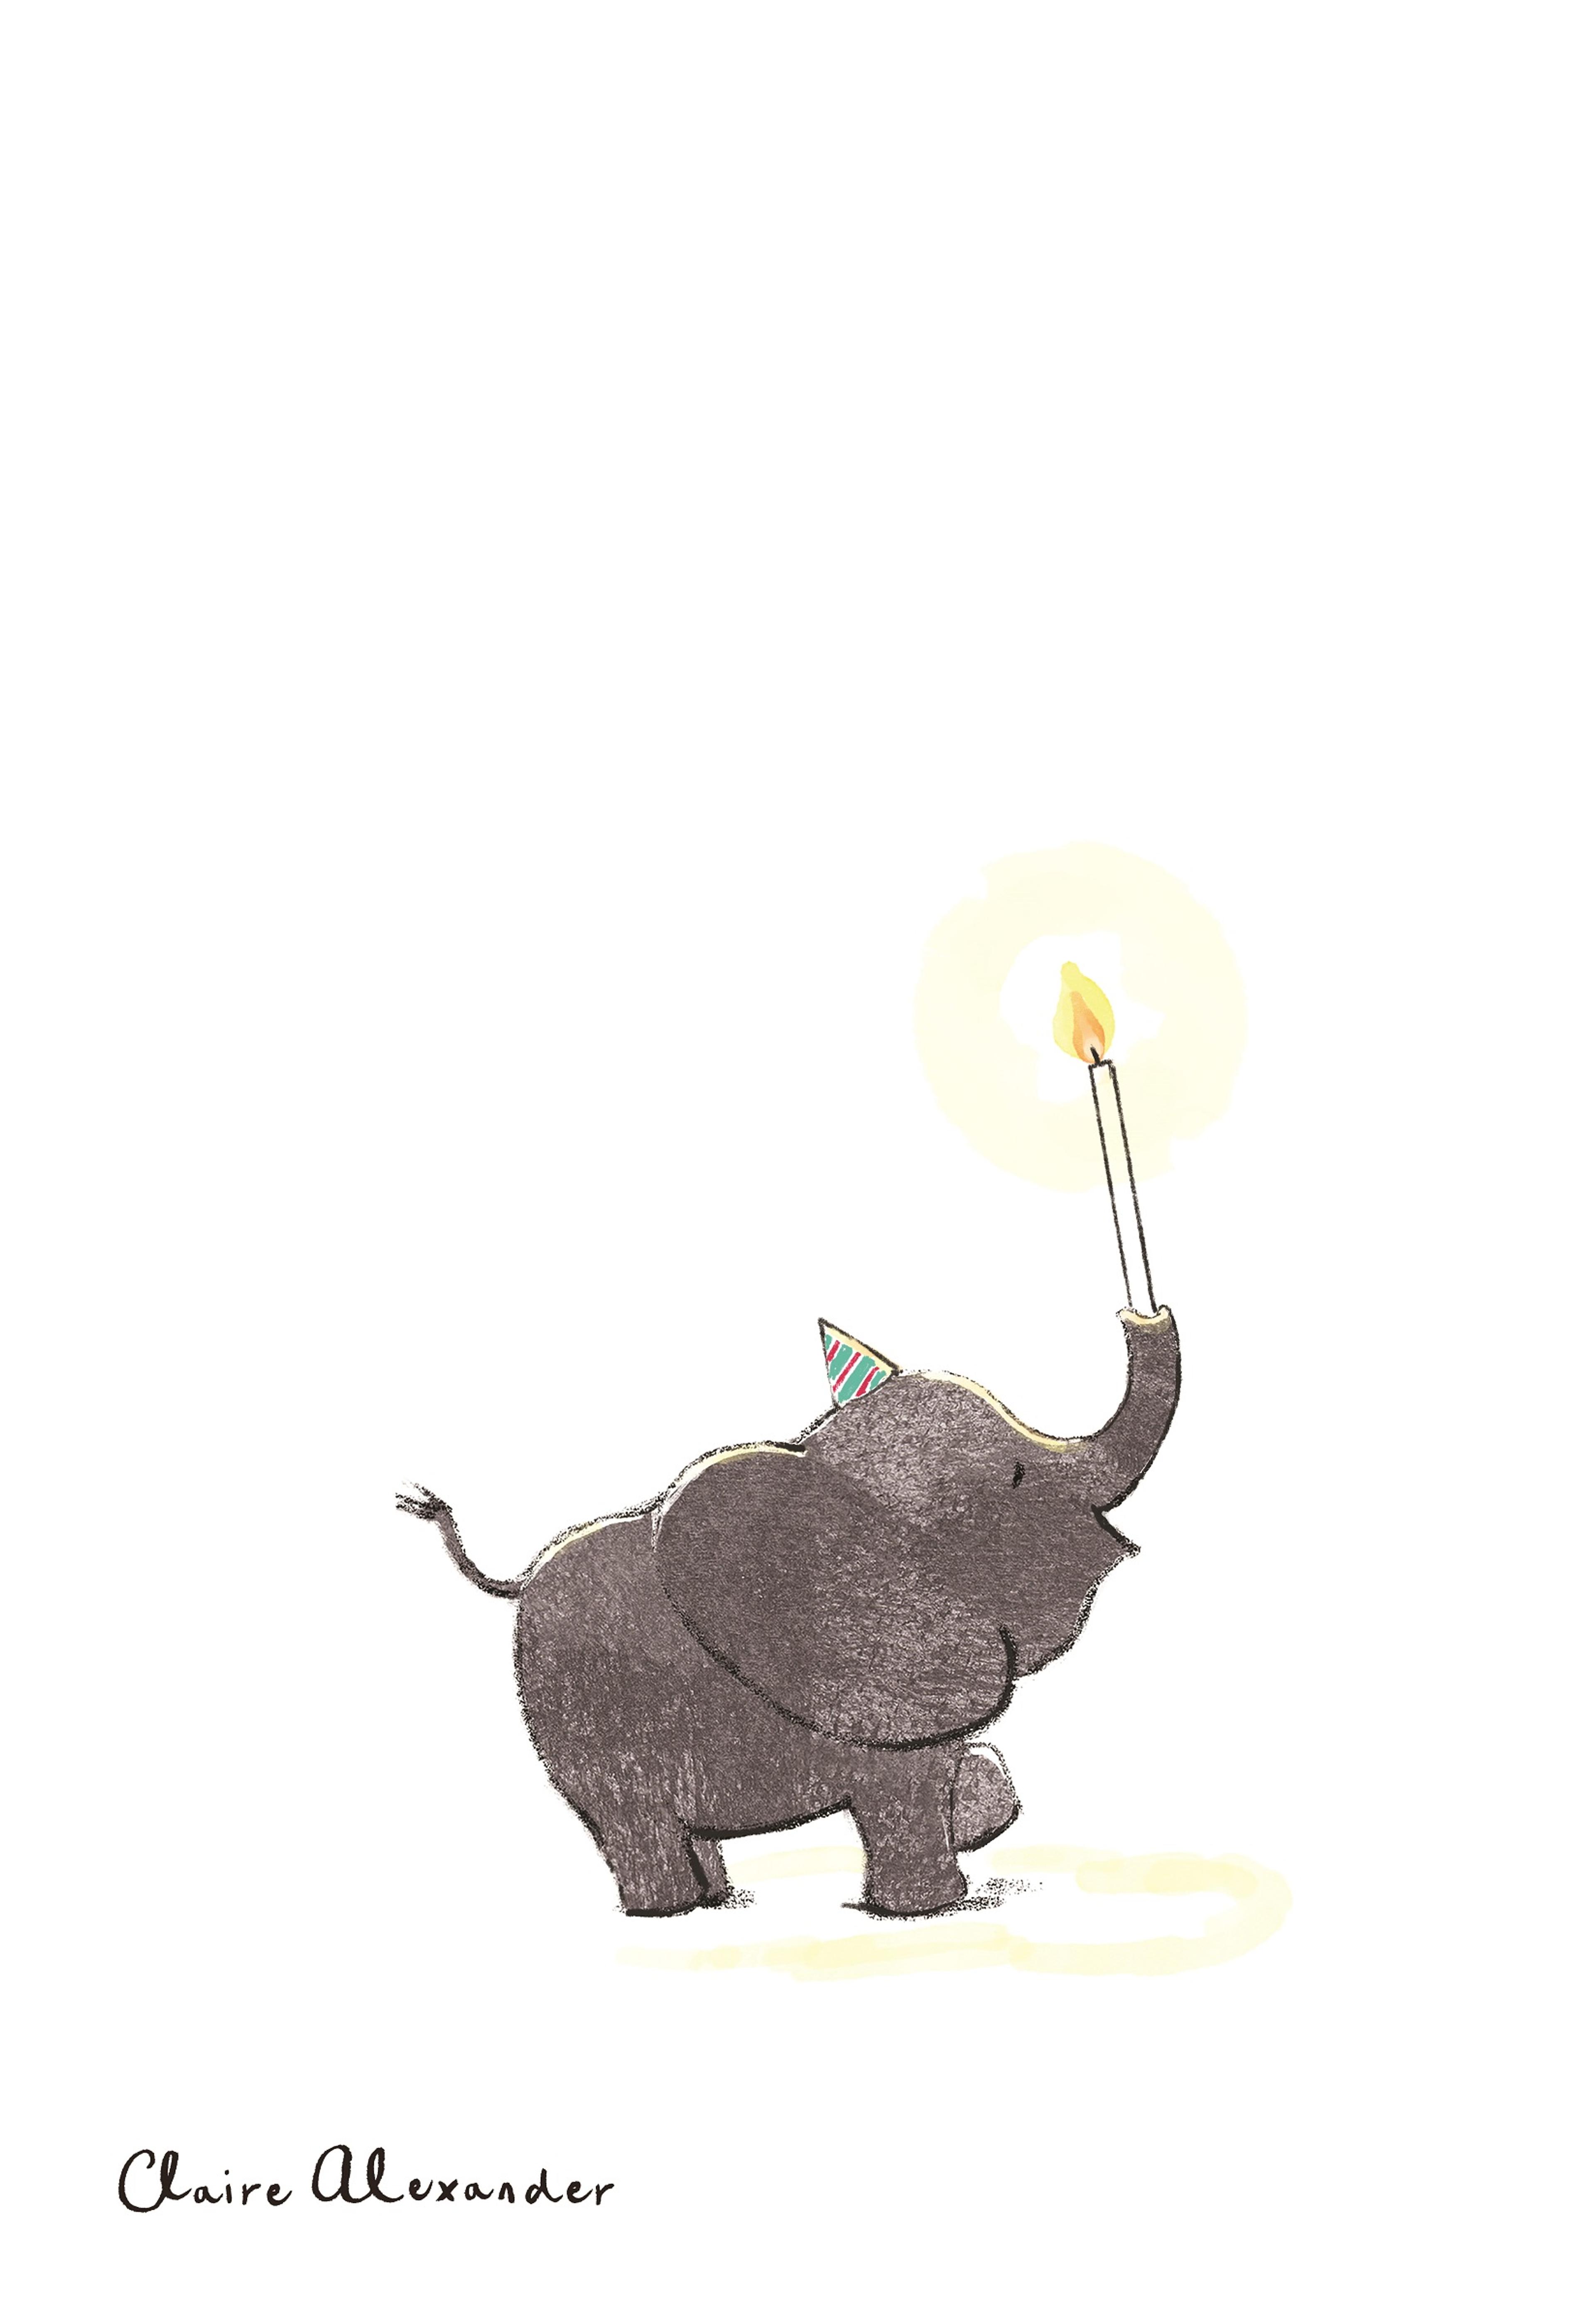 Illustration of an elephant holding a candle in its trunk